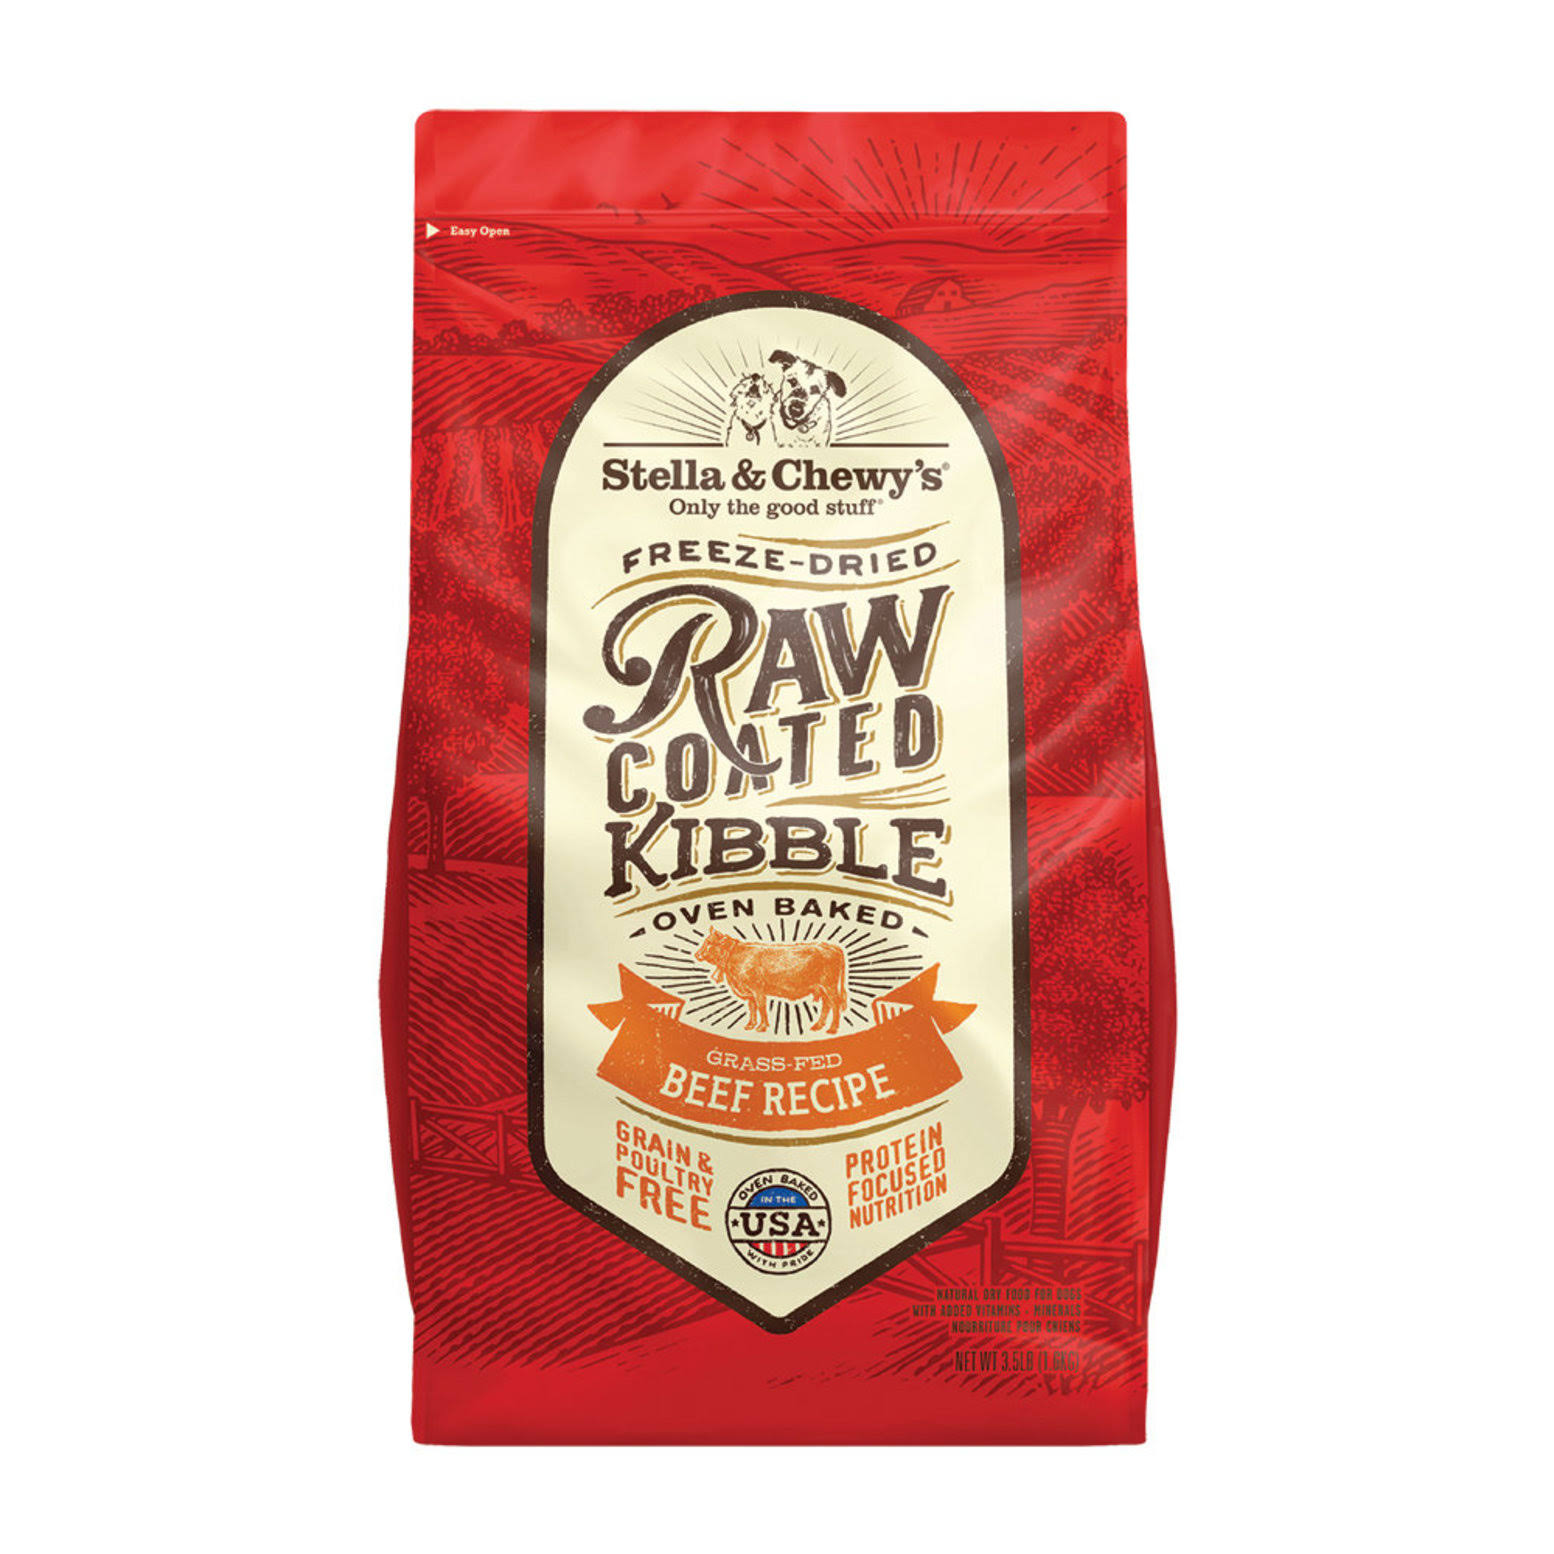 STELLA & CHEWY'S GRASS-FED BEEF RAW COATED KIBBLE DRY DOG FOOD 10 LB